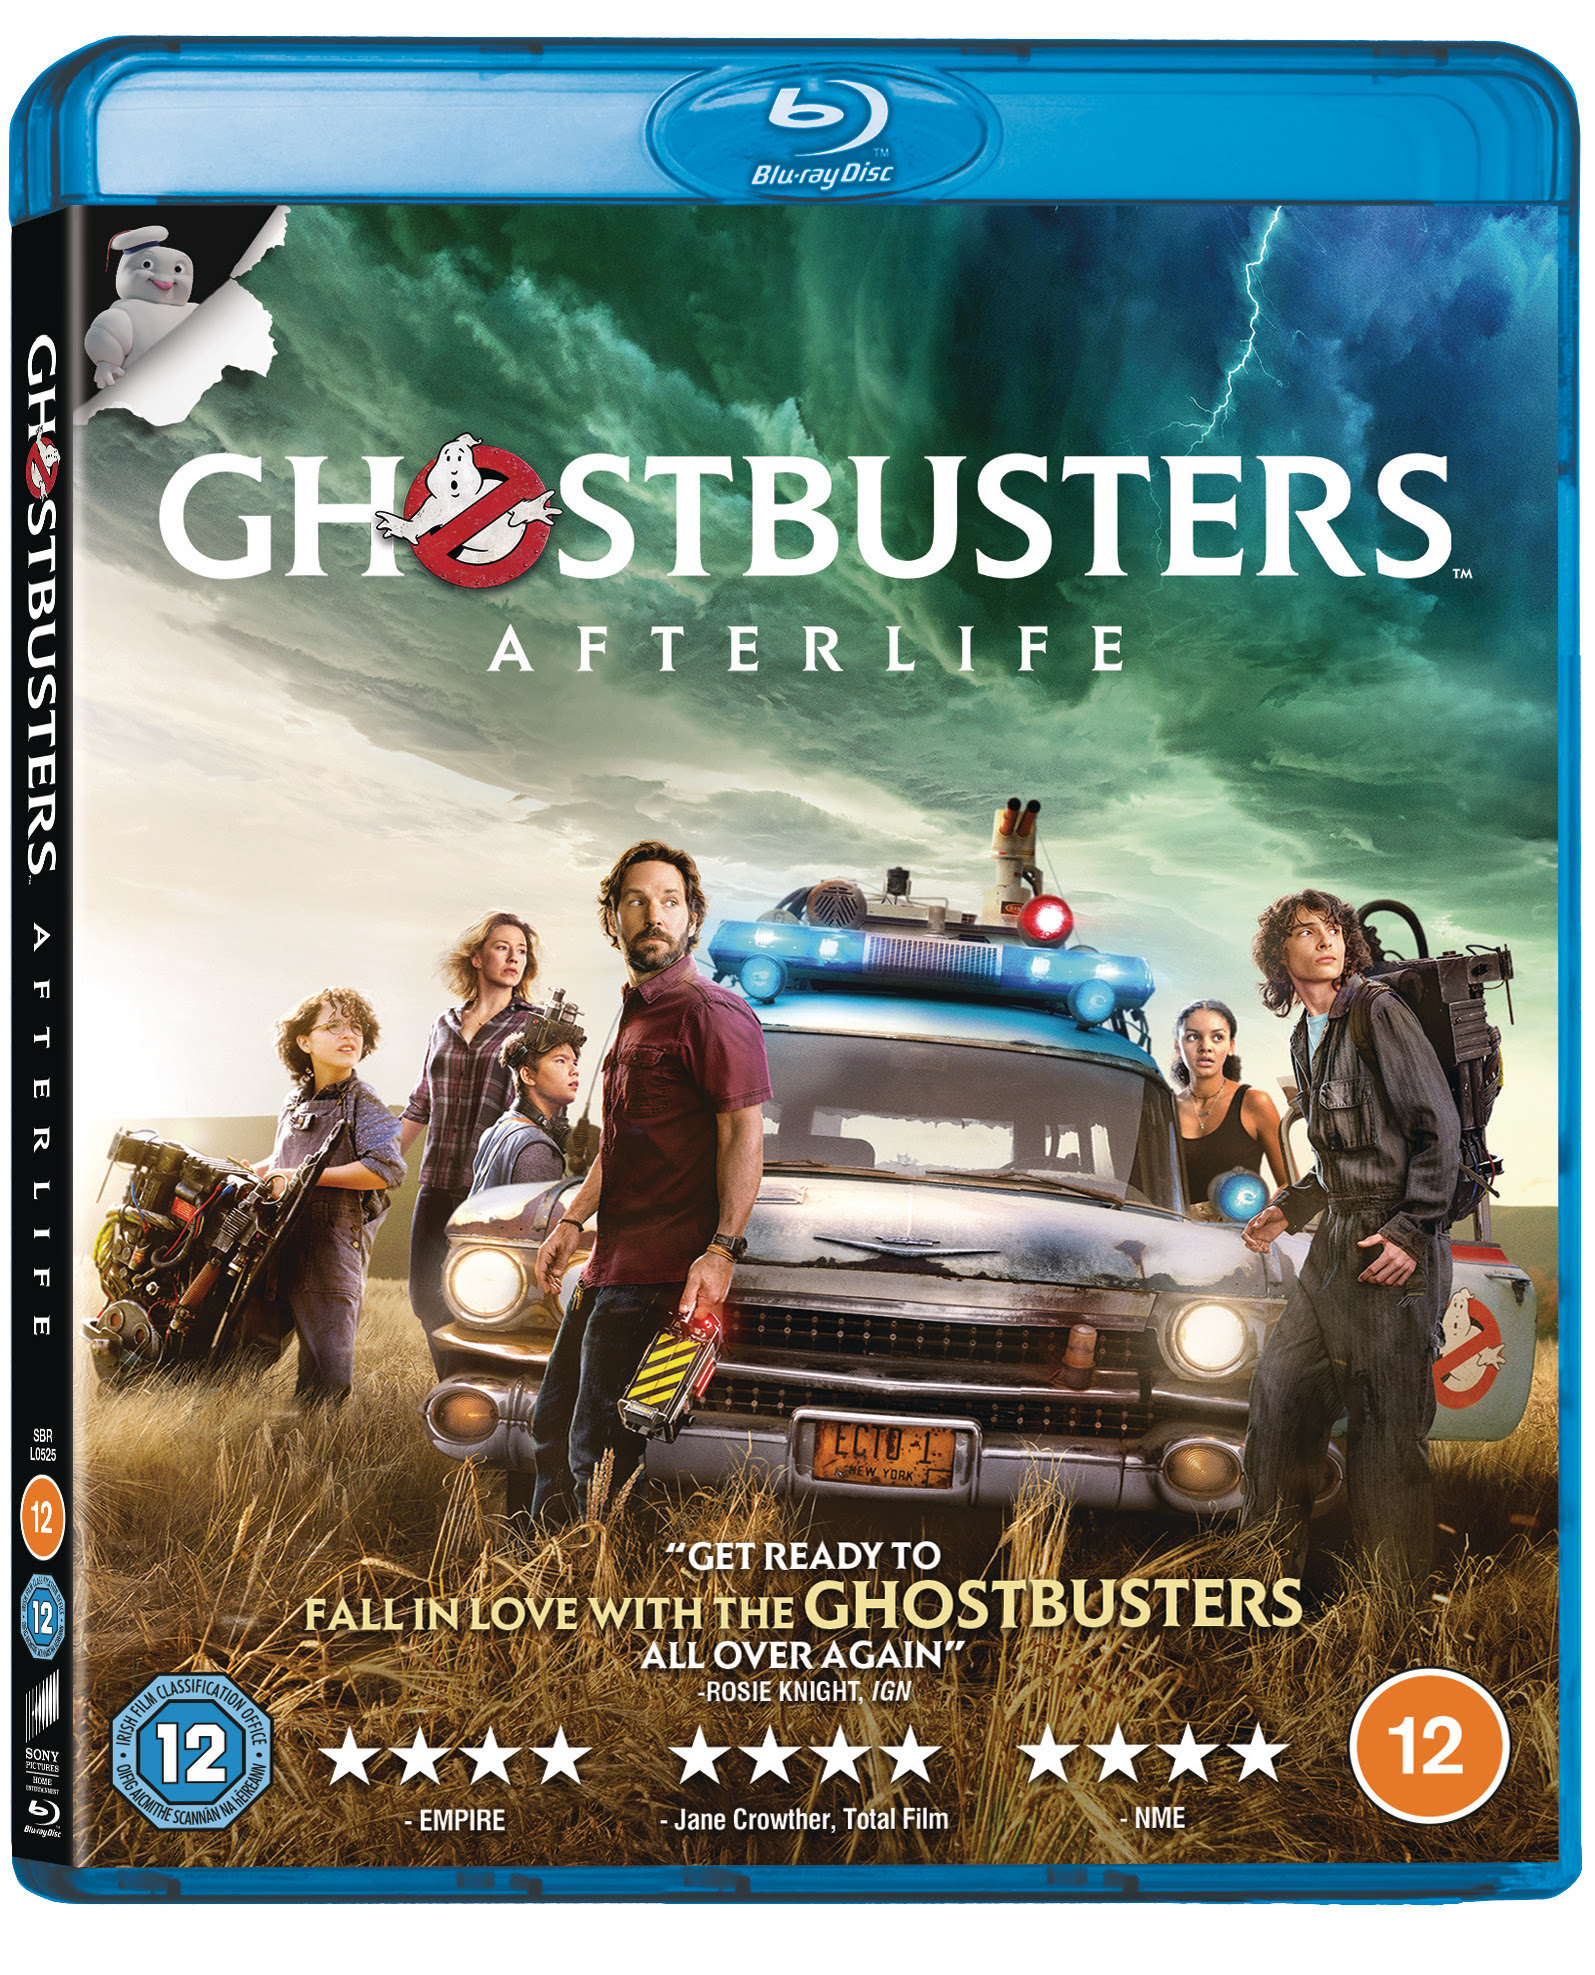 Win Ghostbusters Afterlife on Blu-Ray!!!